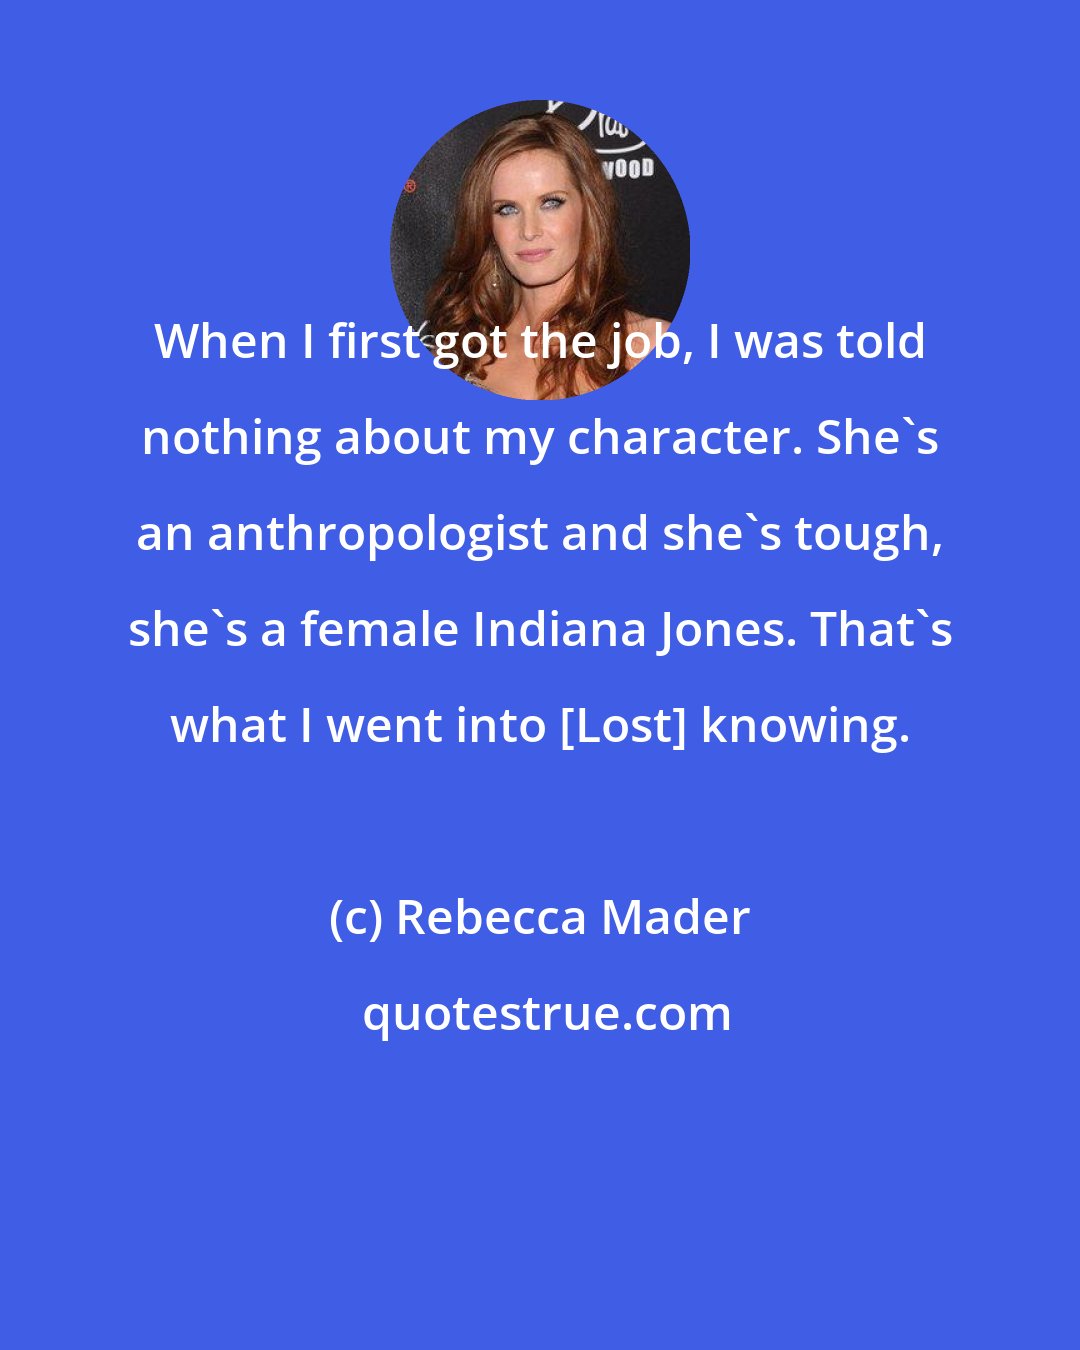 Rebecca Mader: When I first got the job, I was told nothing about my character. She's an anthropologist and she's tough, she's a female Indiana Jones. That's what I went into [Lost] knowing.